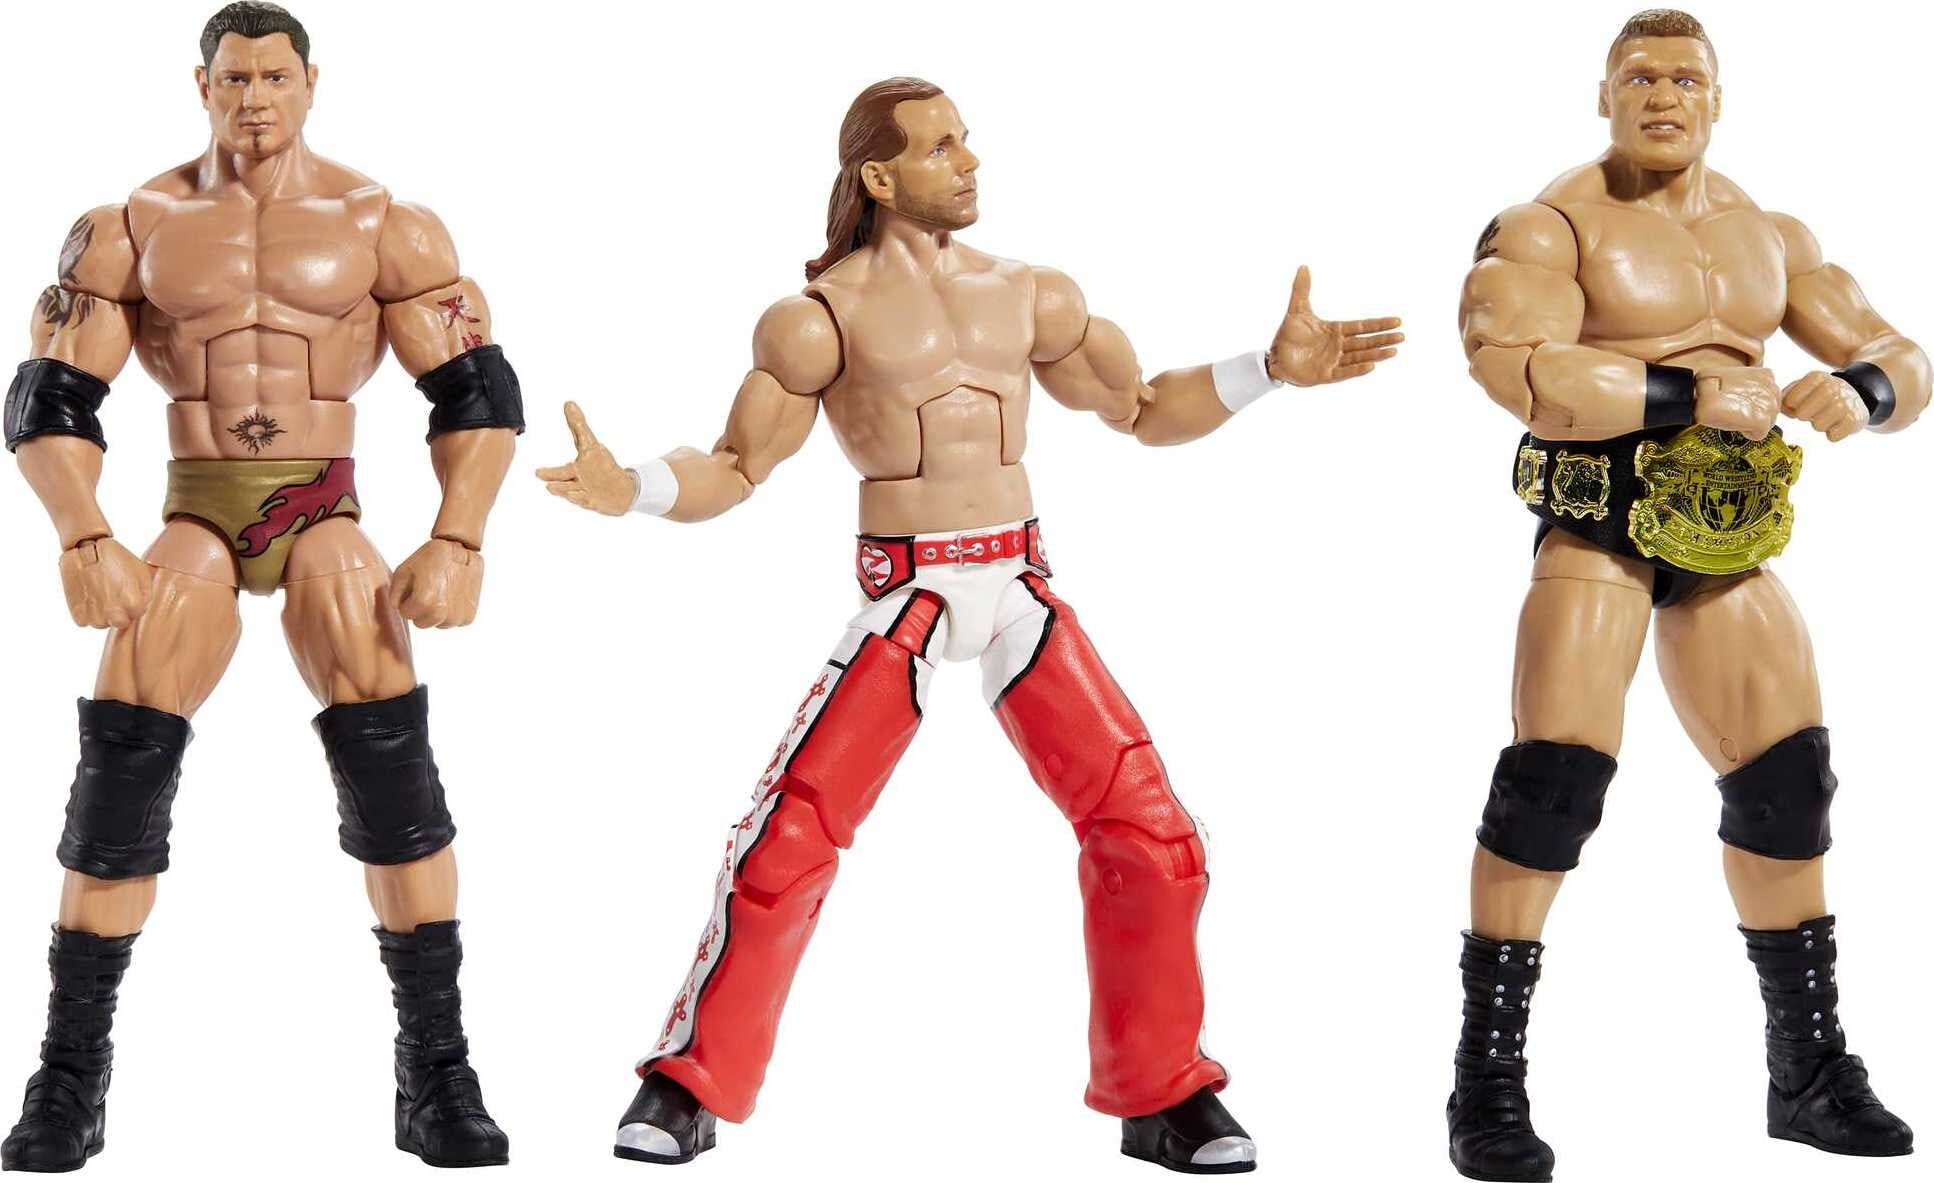 WWE Ultimate Edition Action Figure & Accessories Sets, 6-inch Collectible  Superstars with 30 Articulation Points